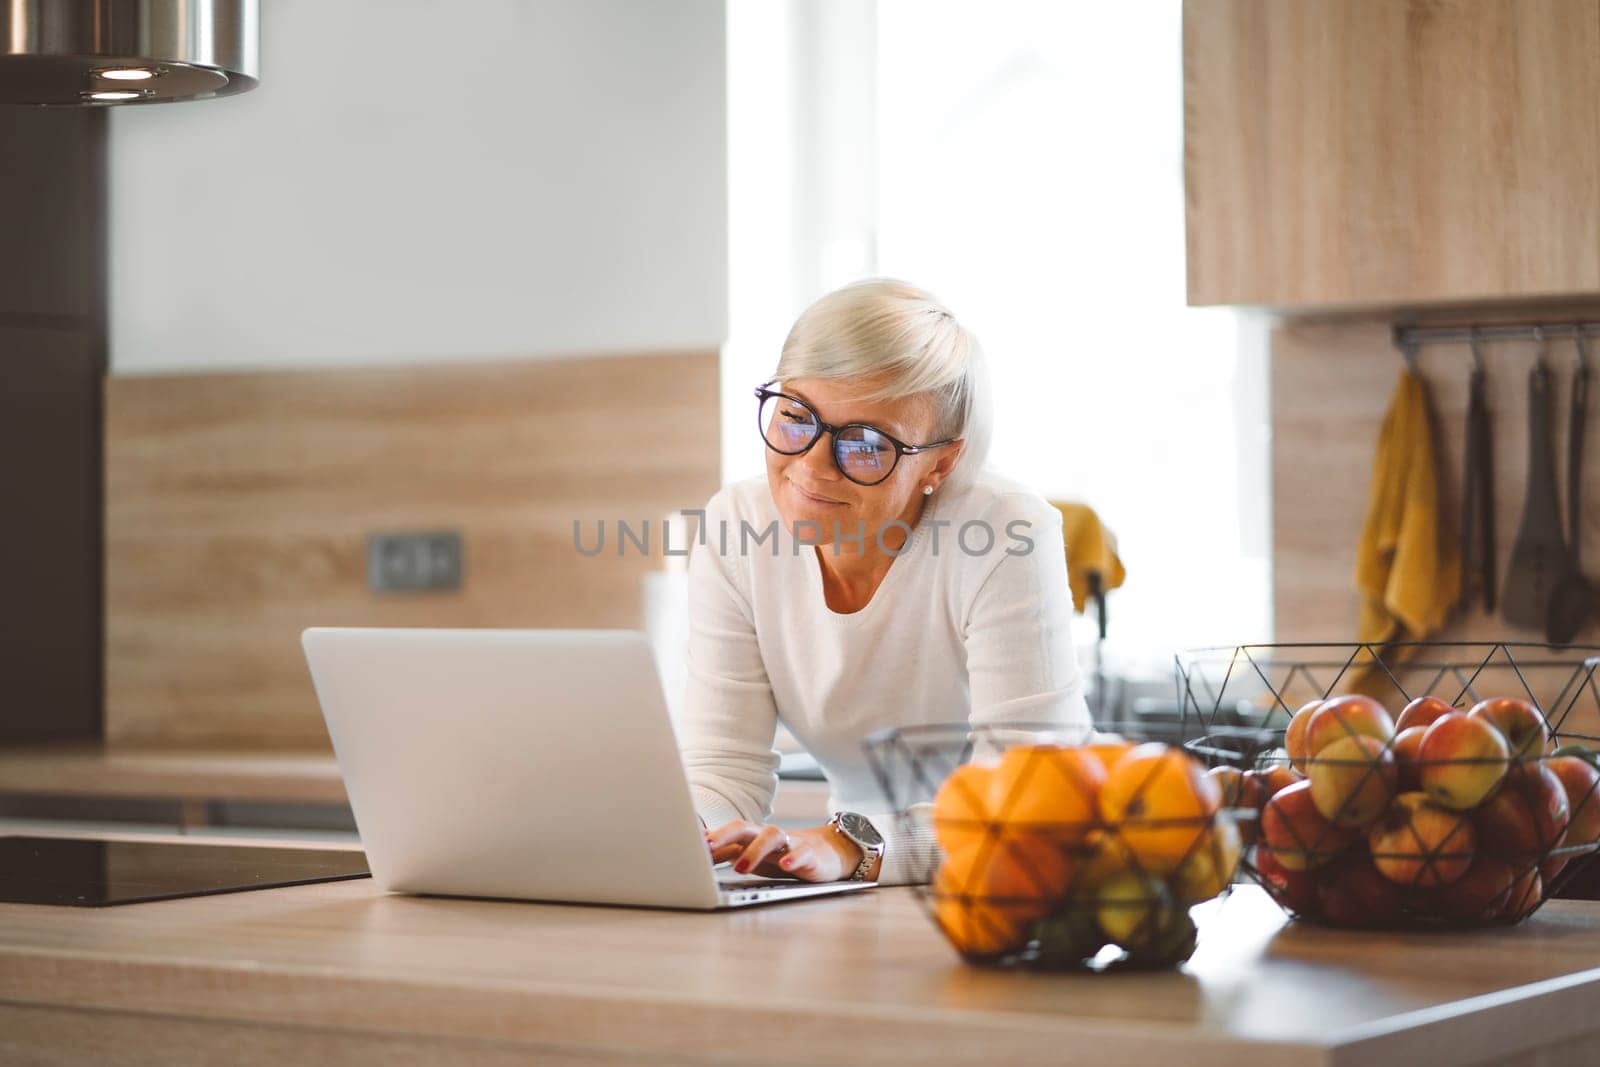 Adult caucasian woman working from home a couple days a week. Adult person working from home, from different rooms in the house, in the kitchen, dining room, office.